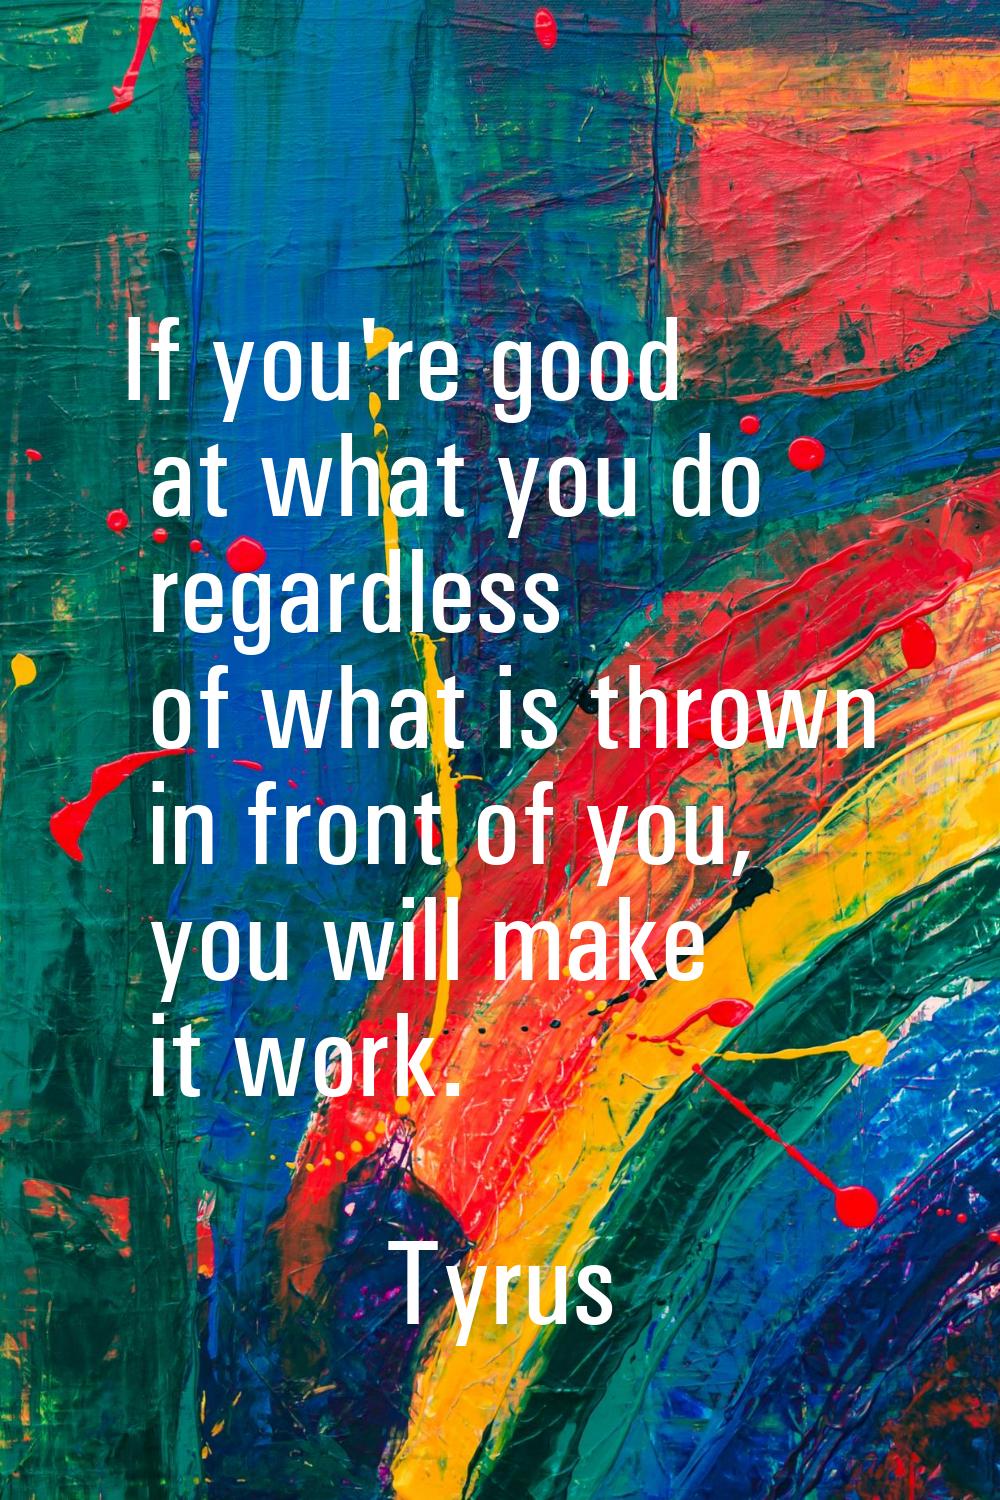 If you're good at what you do regardless of what is thrown in front of you, you will make it work.